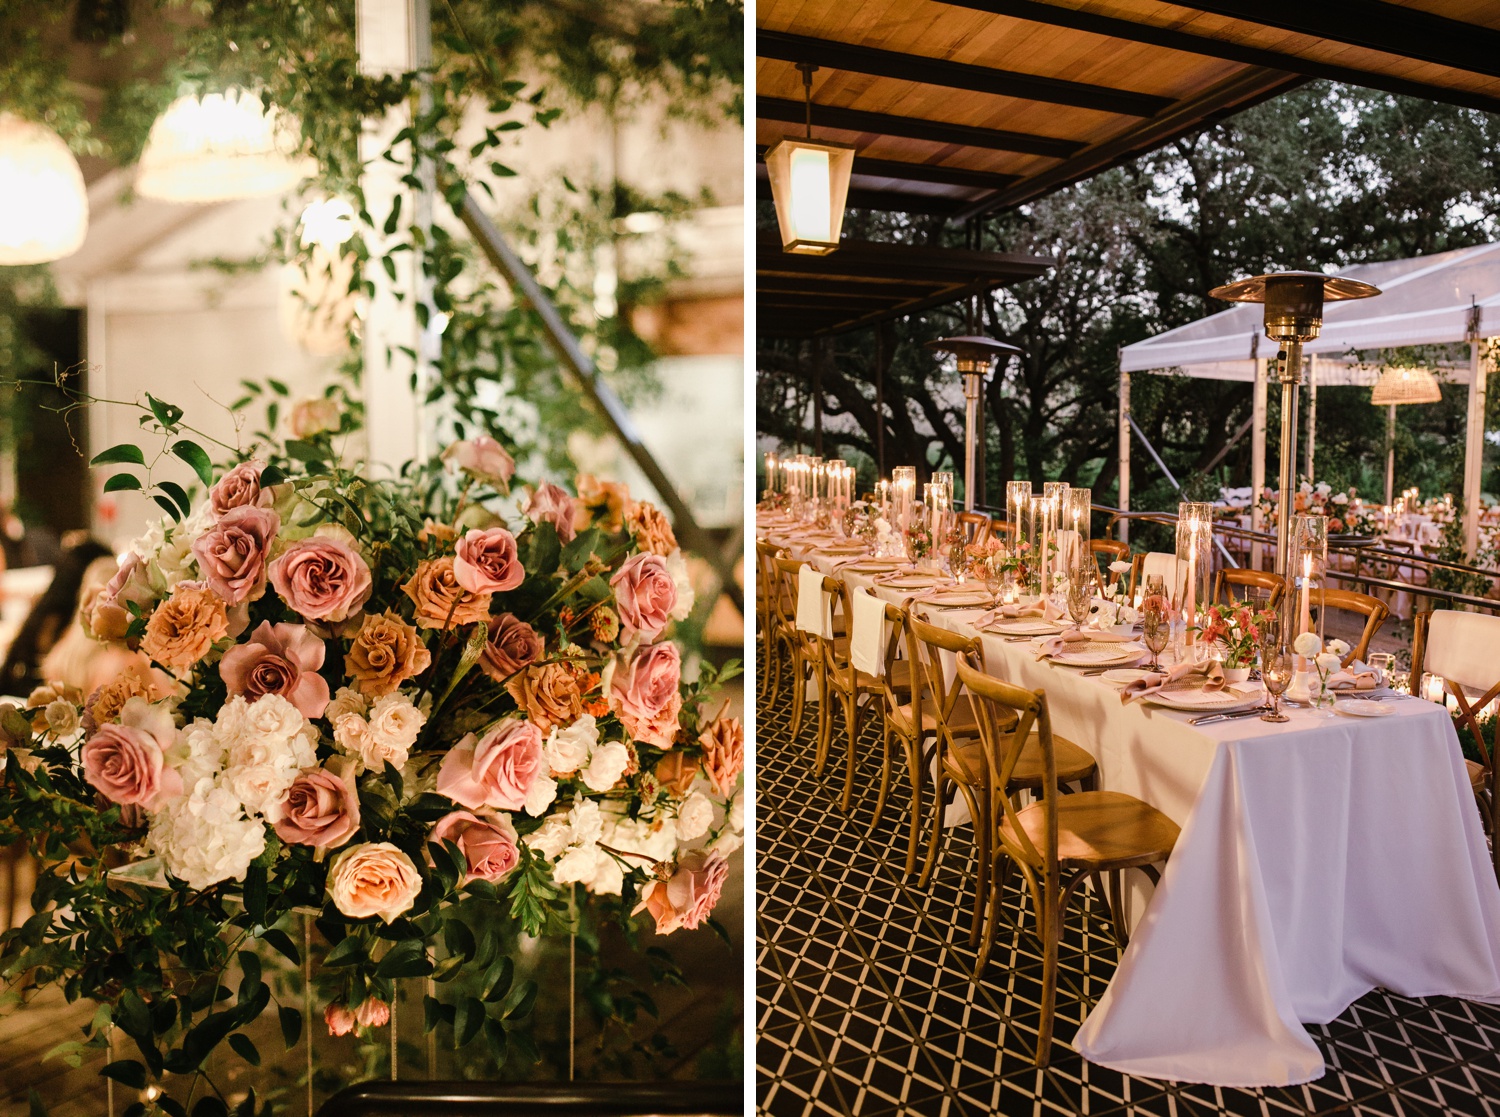 Rattan lanterns, white tablecloths, and peach flowers for an evening dinner reception